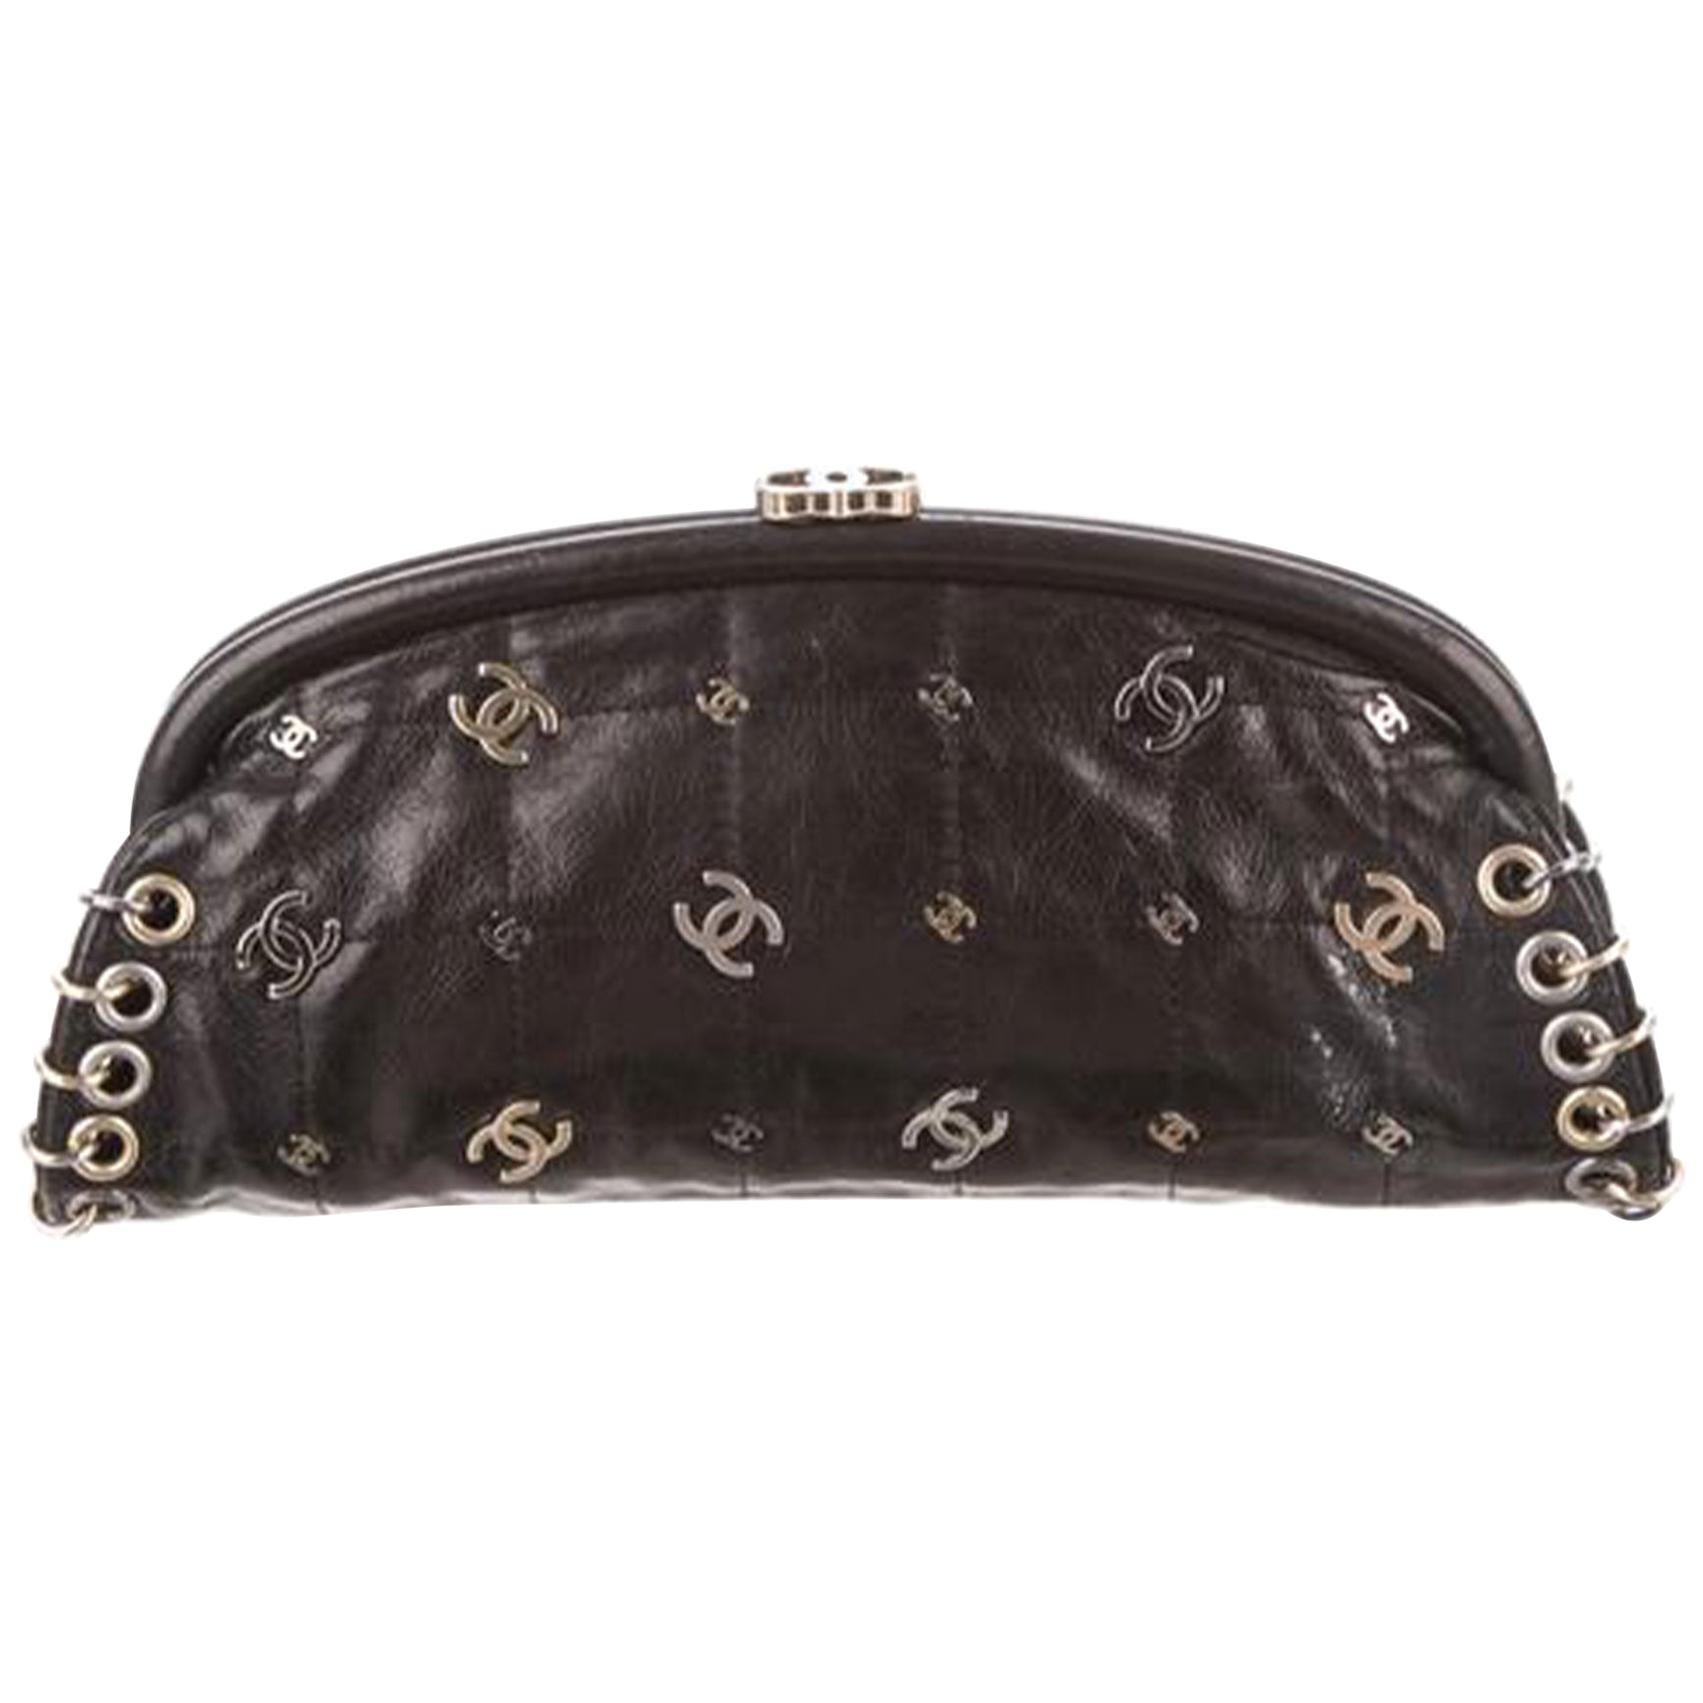 A Short History of Chanels Wild Wonderful Extremely Expensive Novelty  Clutches  PurseBlog